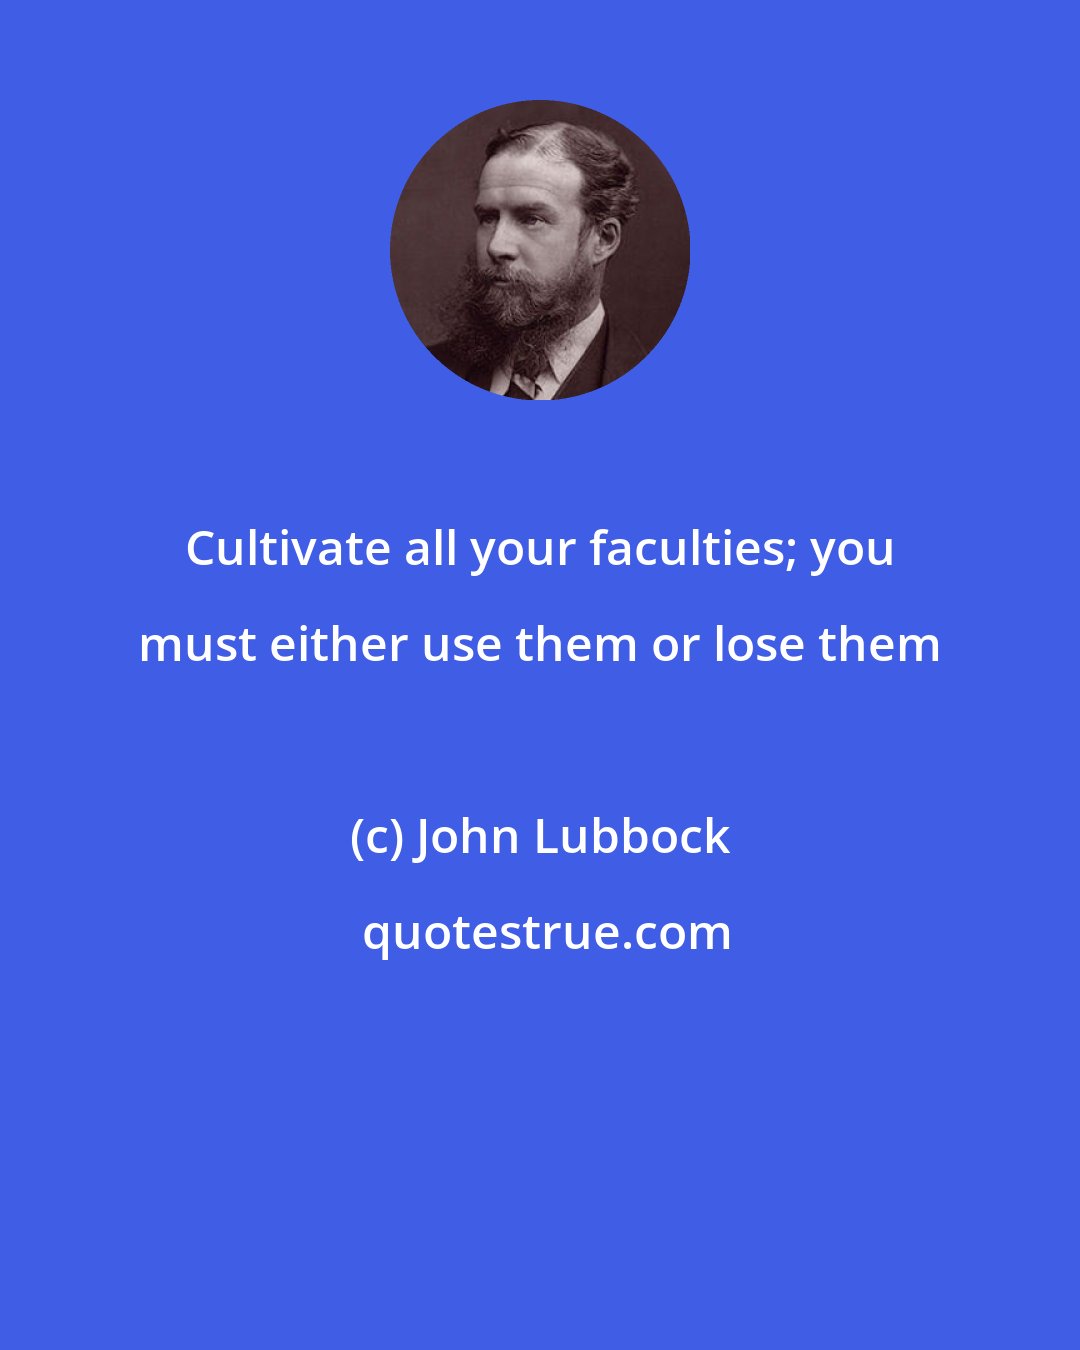 John Lubbock: Cultivate all your faculties; you must either use them or lose them